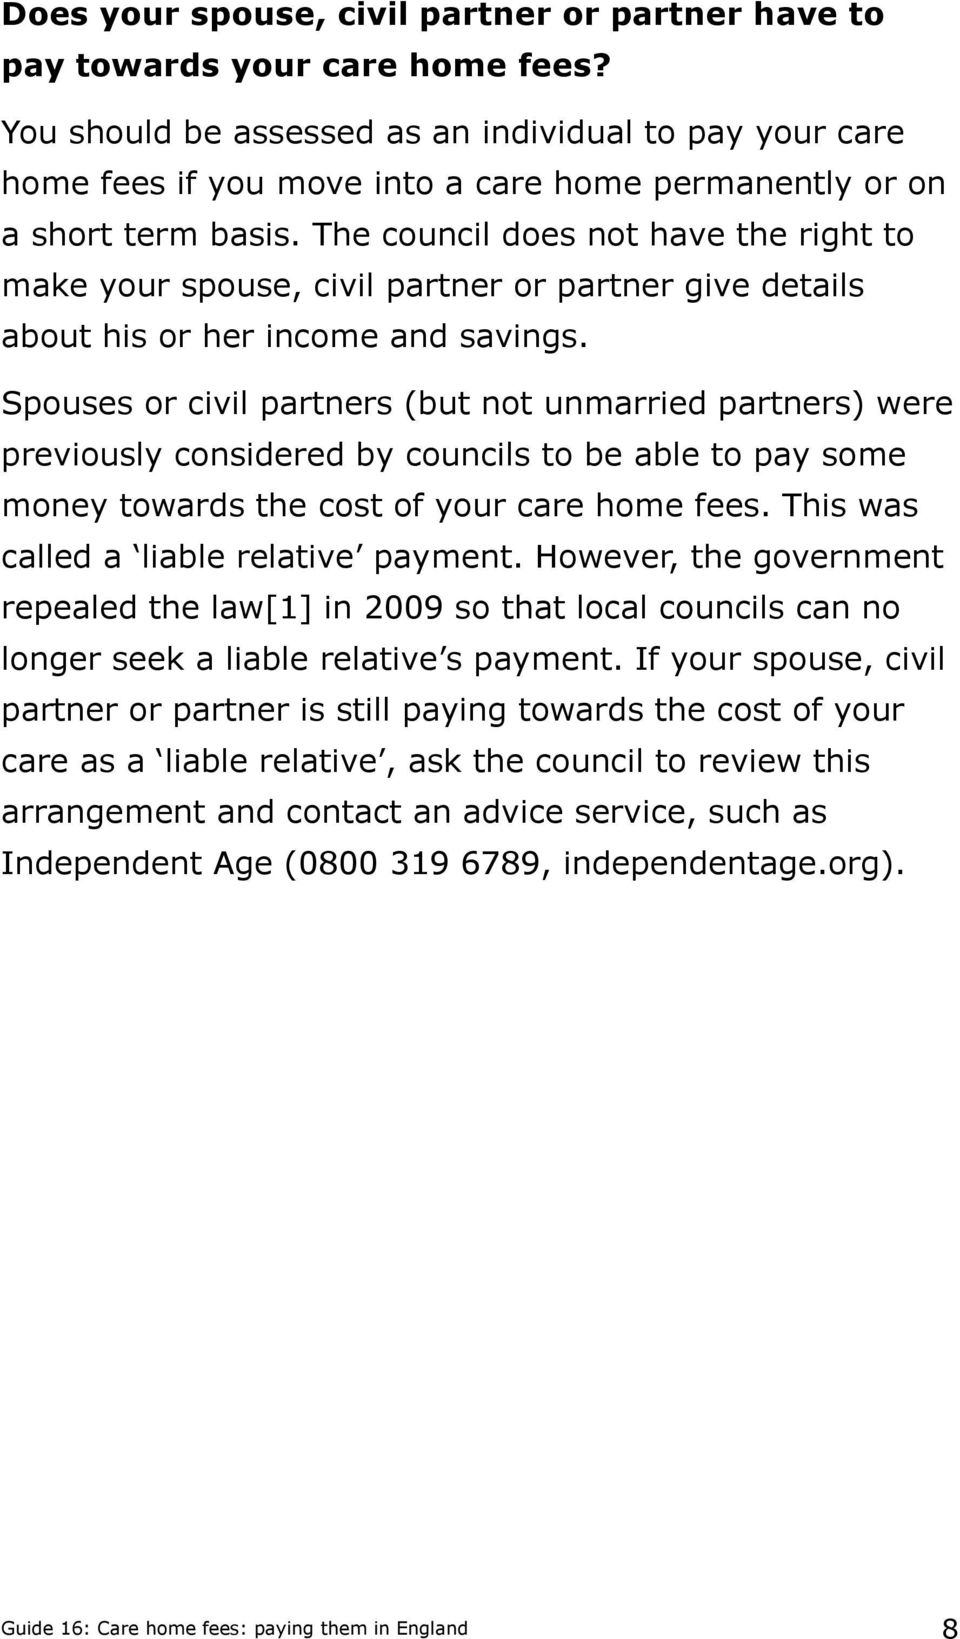 The council does not have the right to make your spouse, civil partner or partner give details about his or her income and savings.